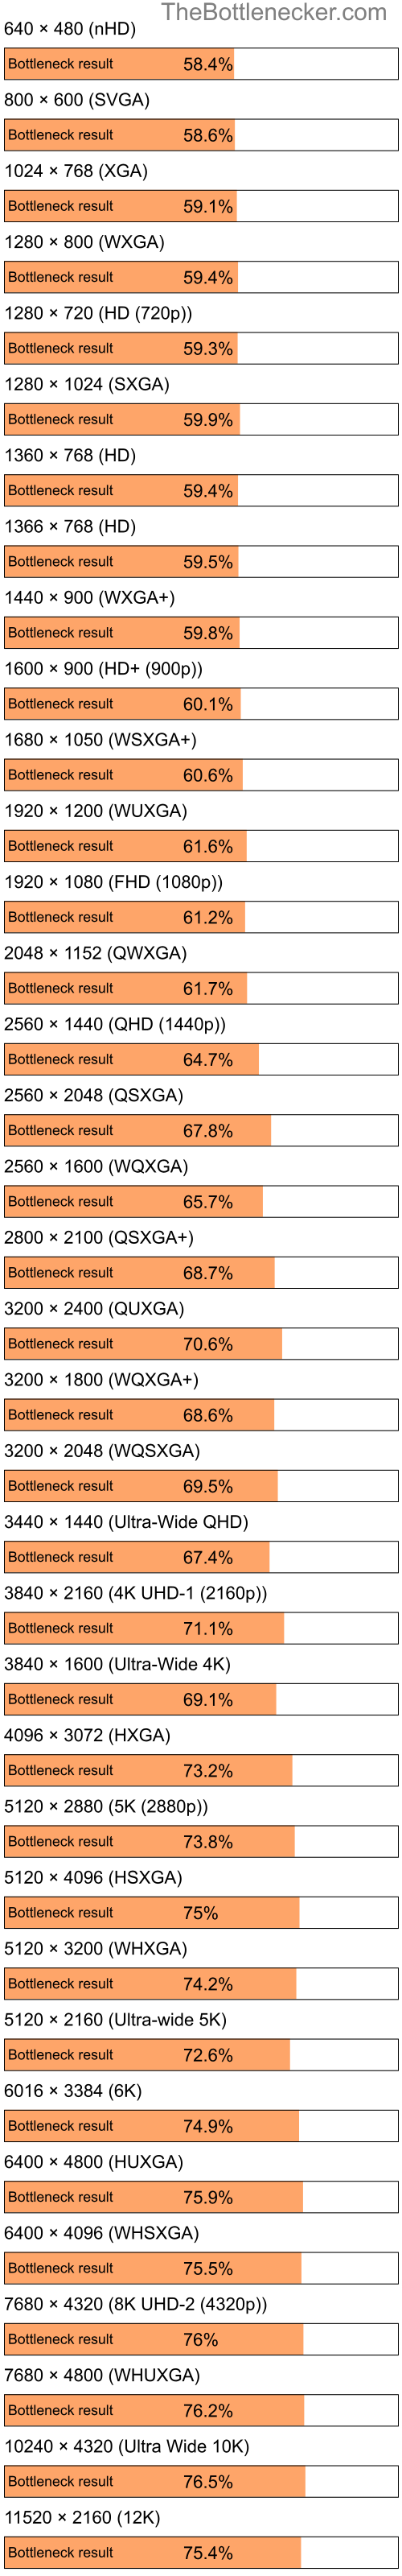 Bottleneck results by resolution for Intel Atom Z520 and AMD Radeon HD 7290 in General Tasks